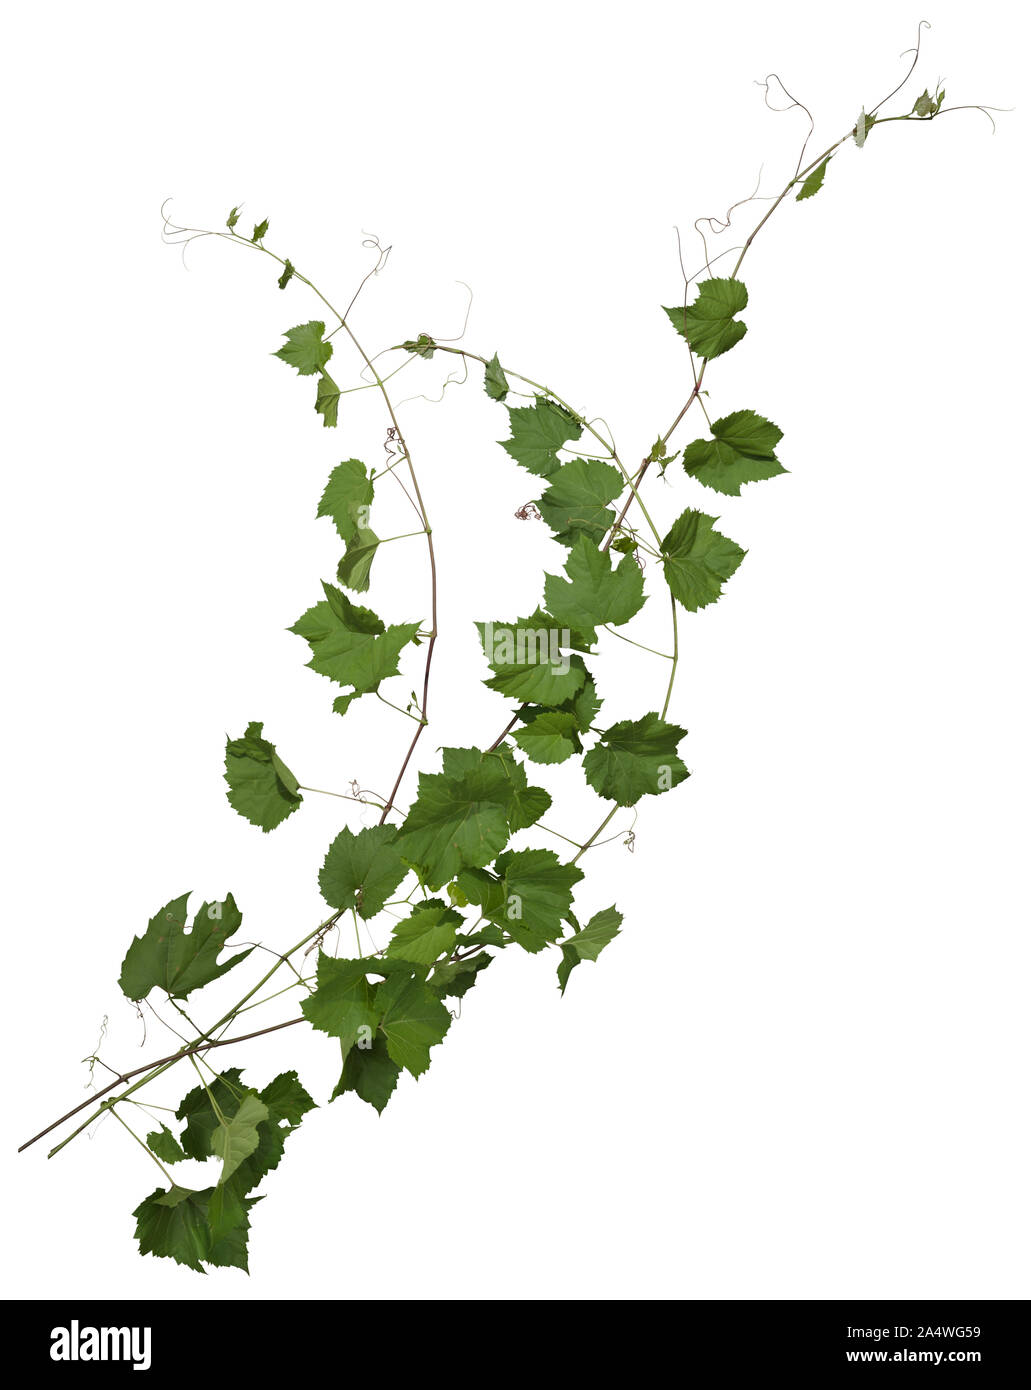 Ivy with green foliage. Climbing plant isolated on white background. Wild vines leaves. High quality clipping mask for professional composition. Stock Photo